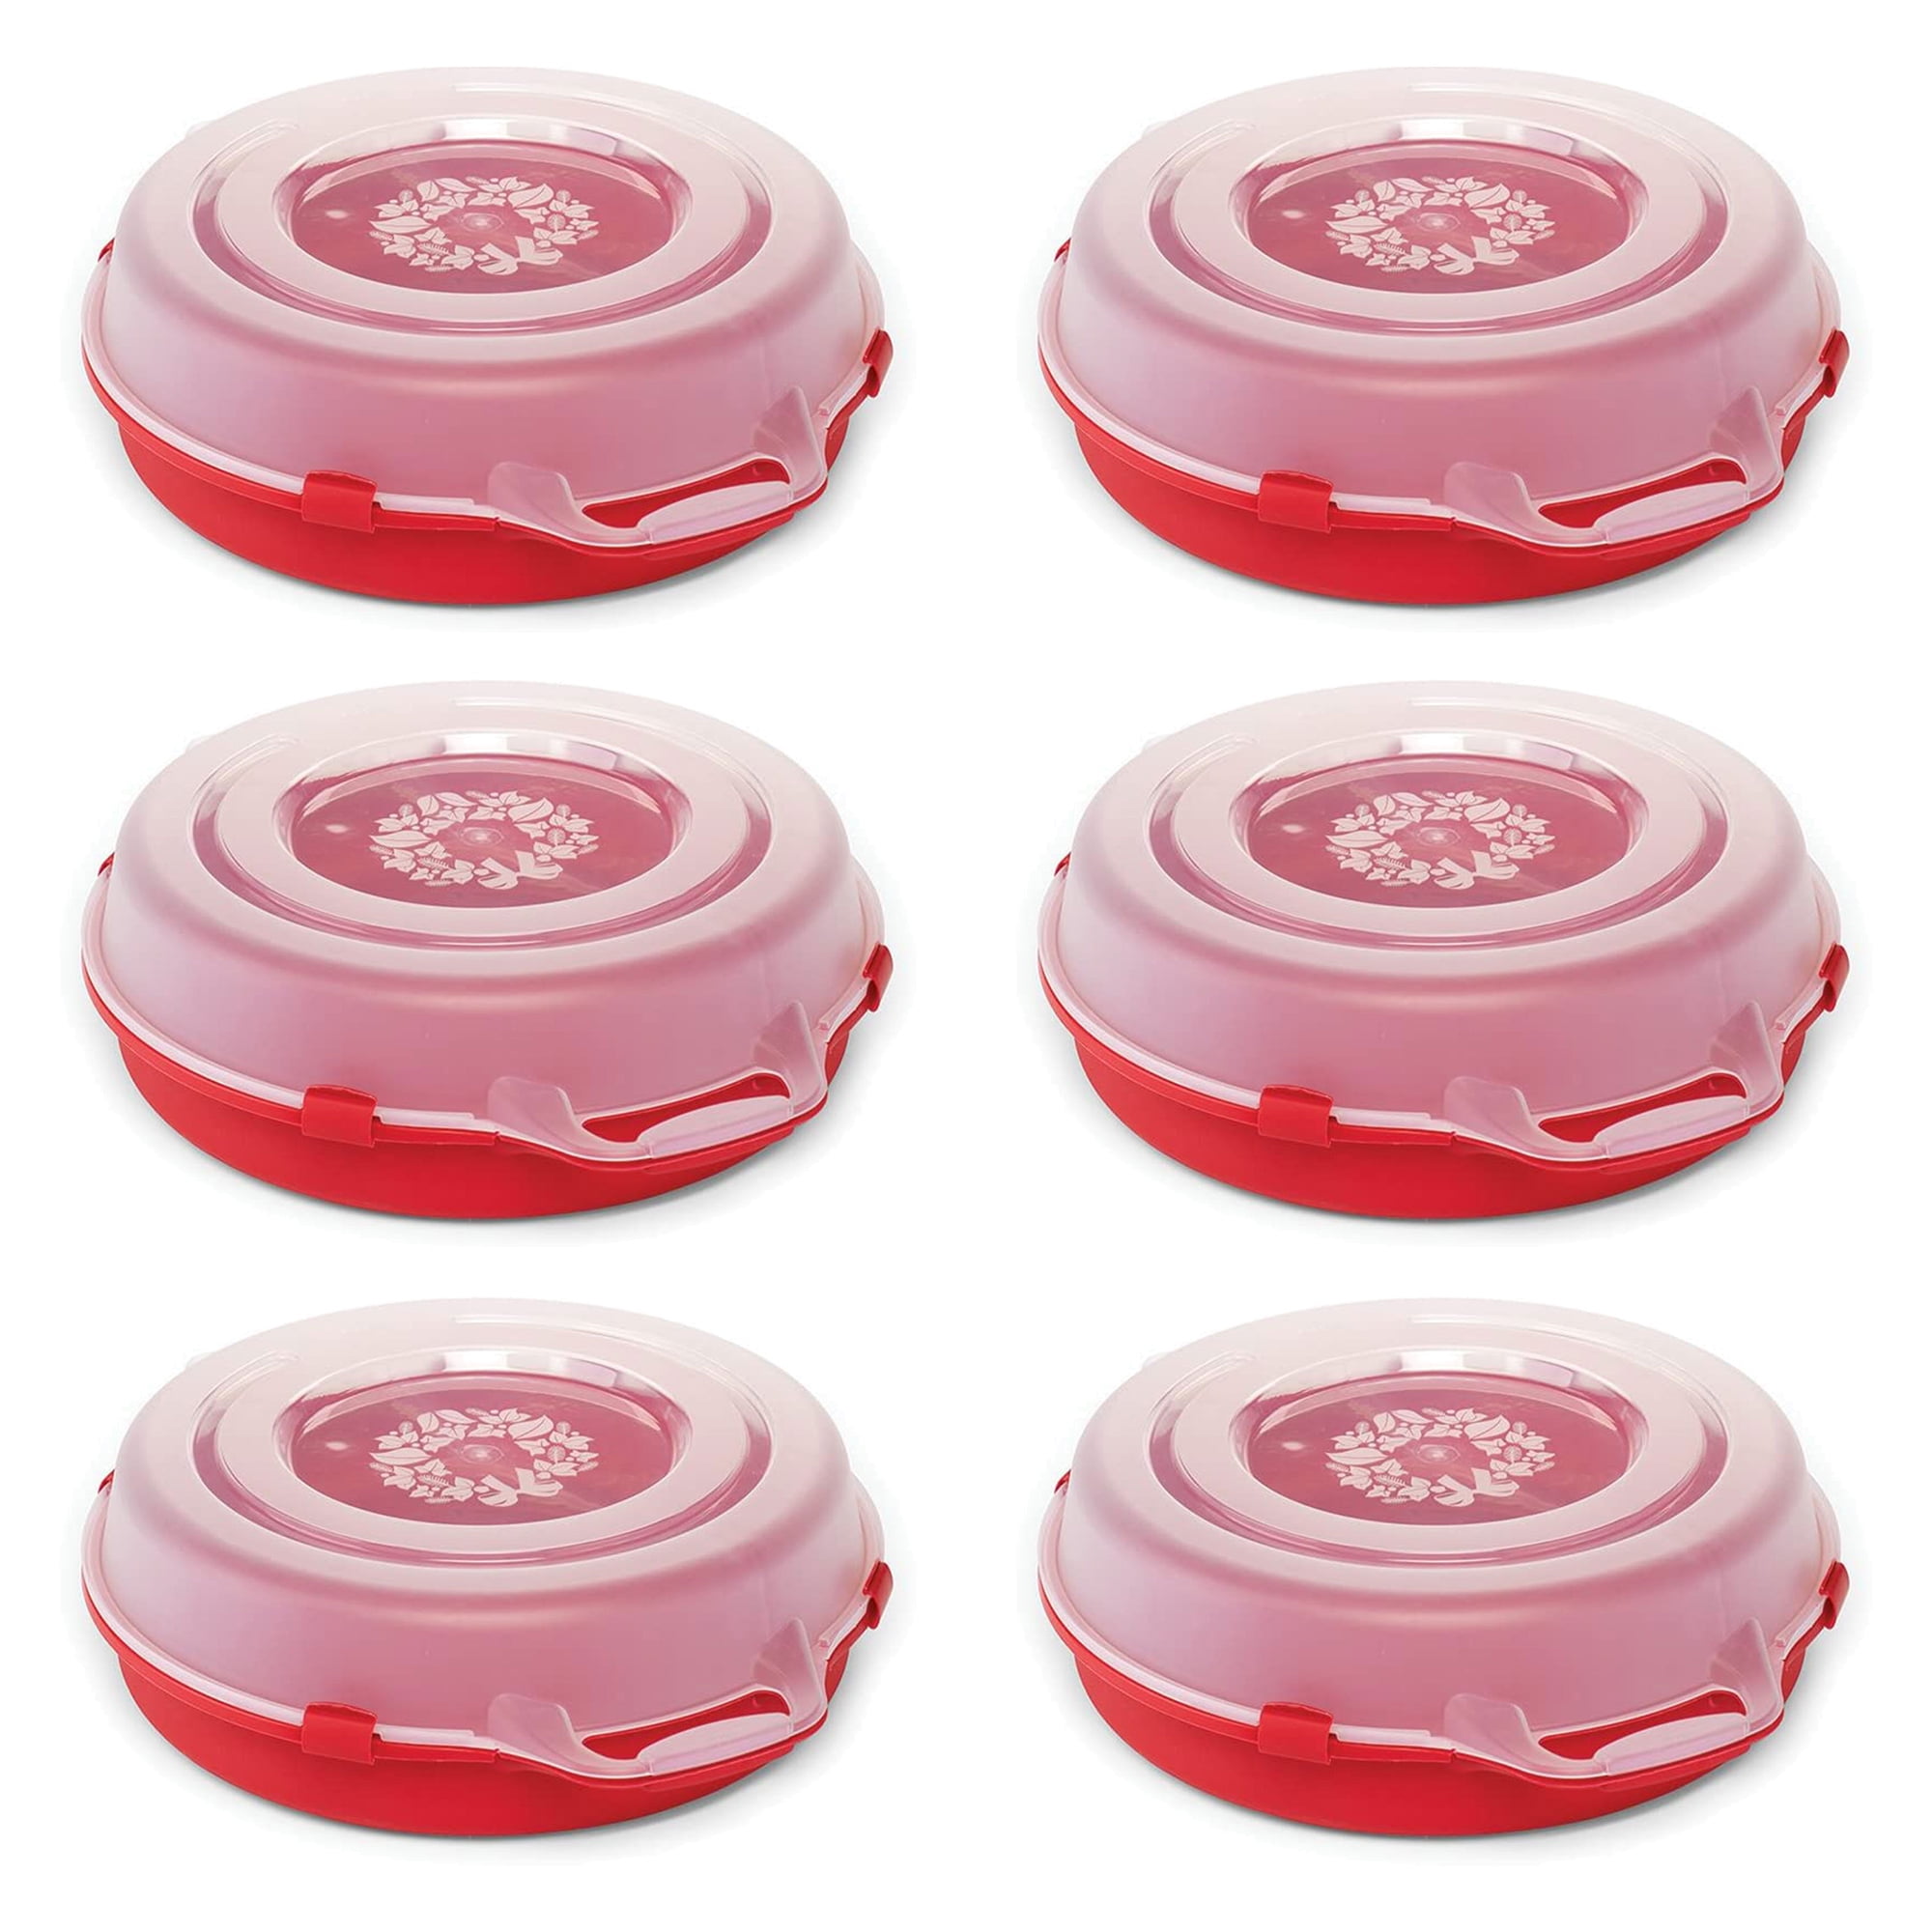 HOMZ Set of 3 Holiday Wreath Plastic Storage Containers, Holds Up to 24”  Diameter, Secure Latching Lid and Easy Grip Handle, Stackable, Red/Clear